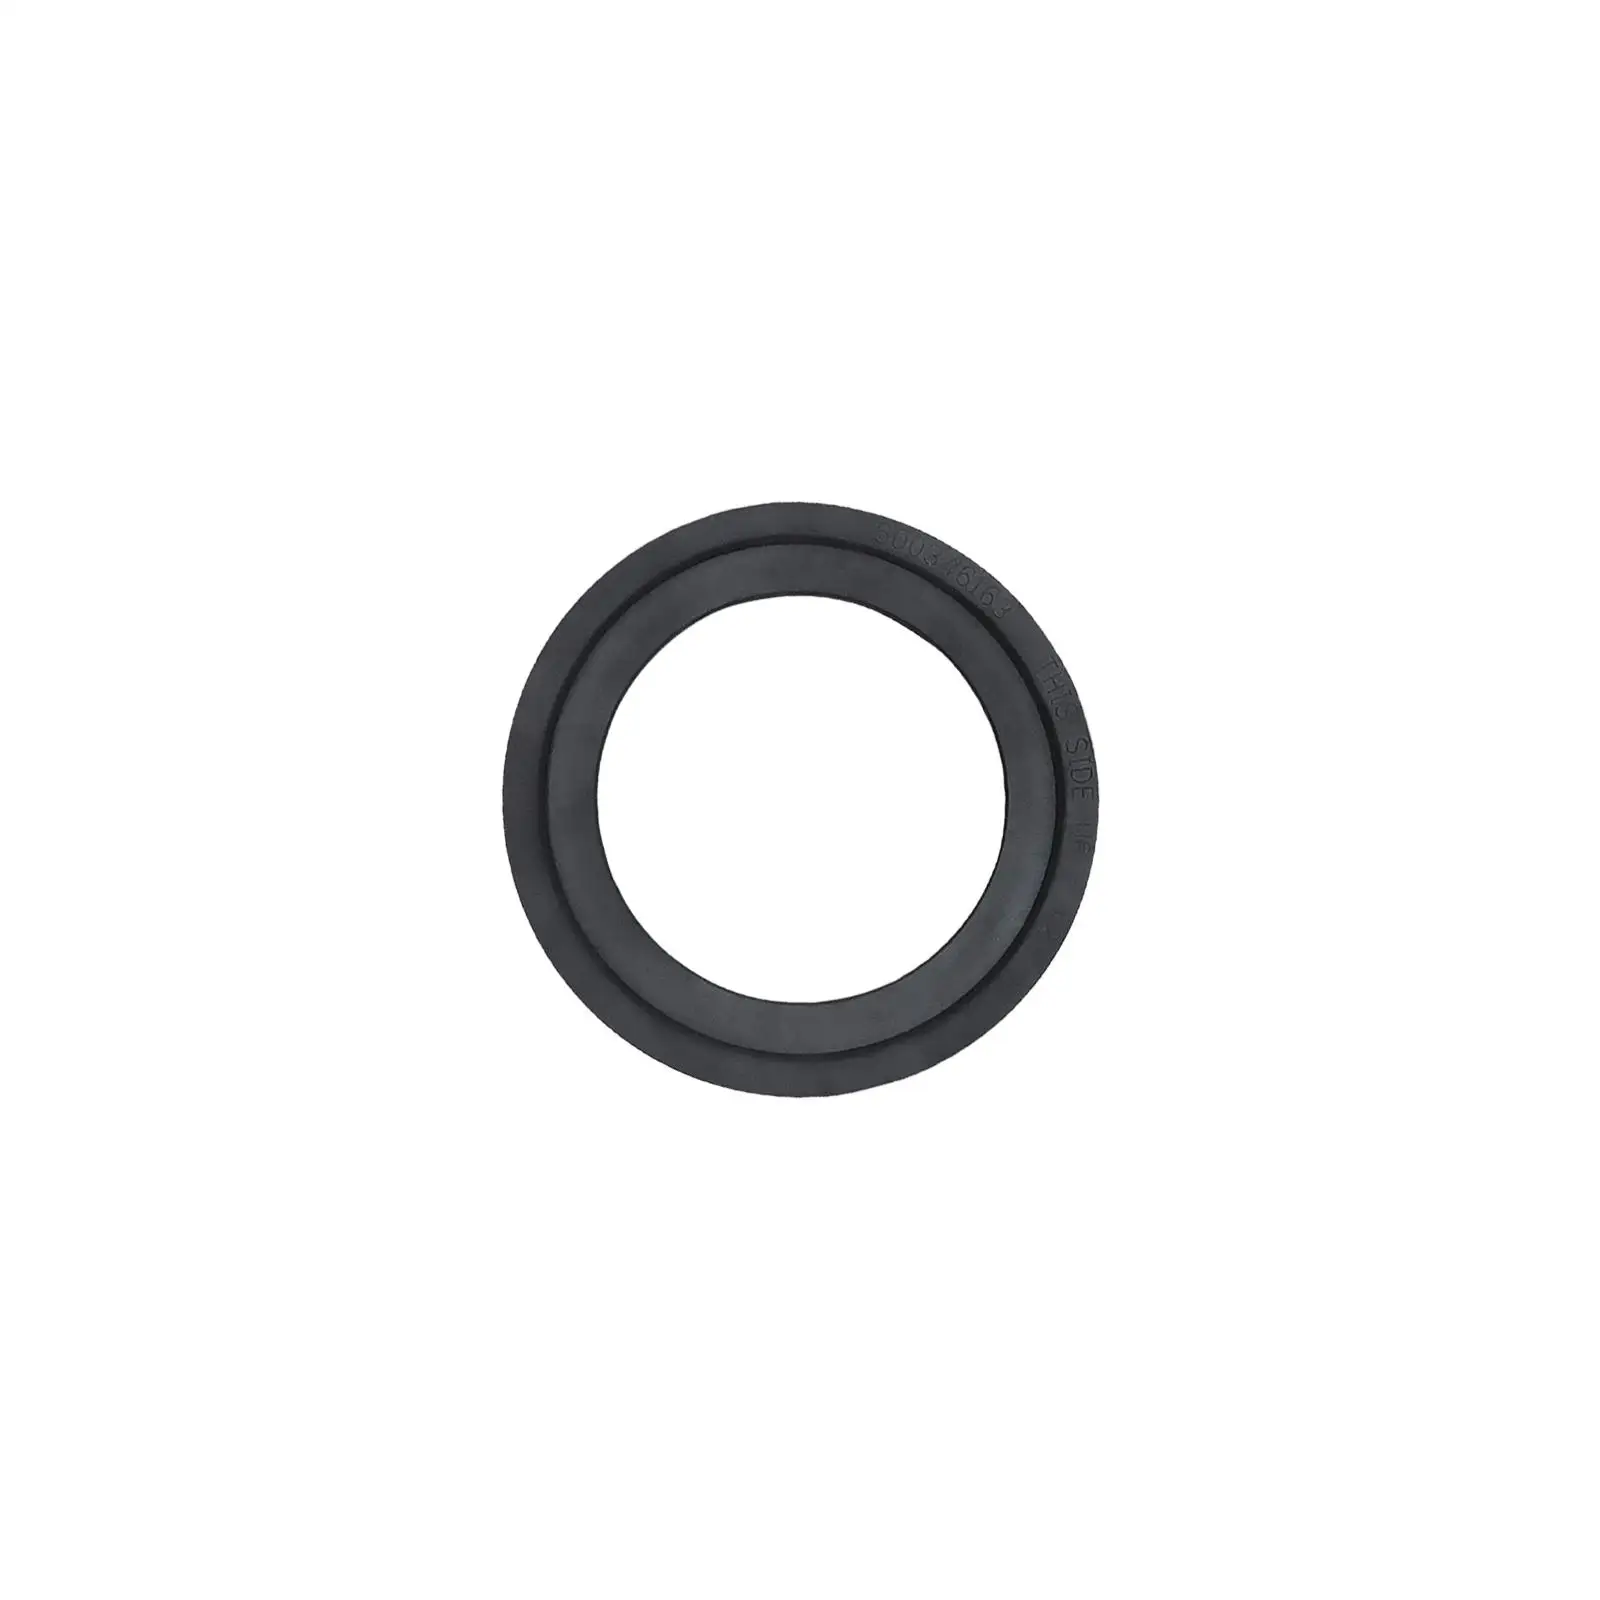 RV Toilet Flush Ball Ring Seal Gaskets RV Accessories 385311658 for Dometic 300 310 320 RV Toilet Parts Durable